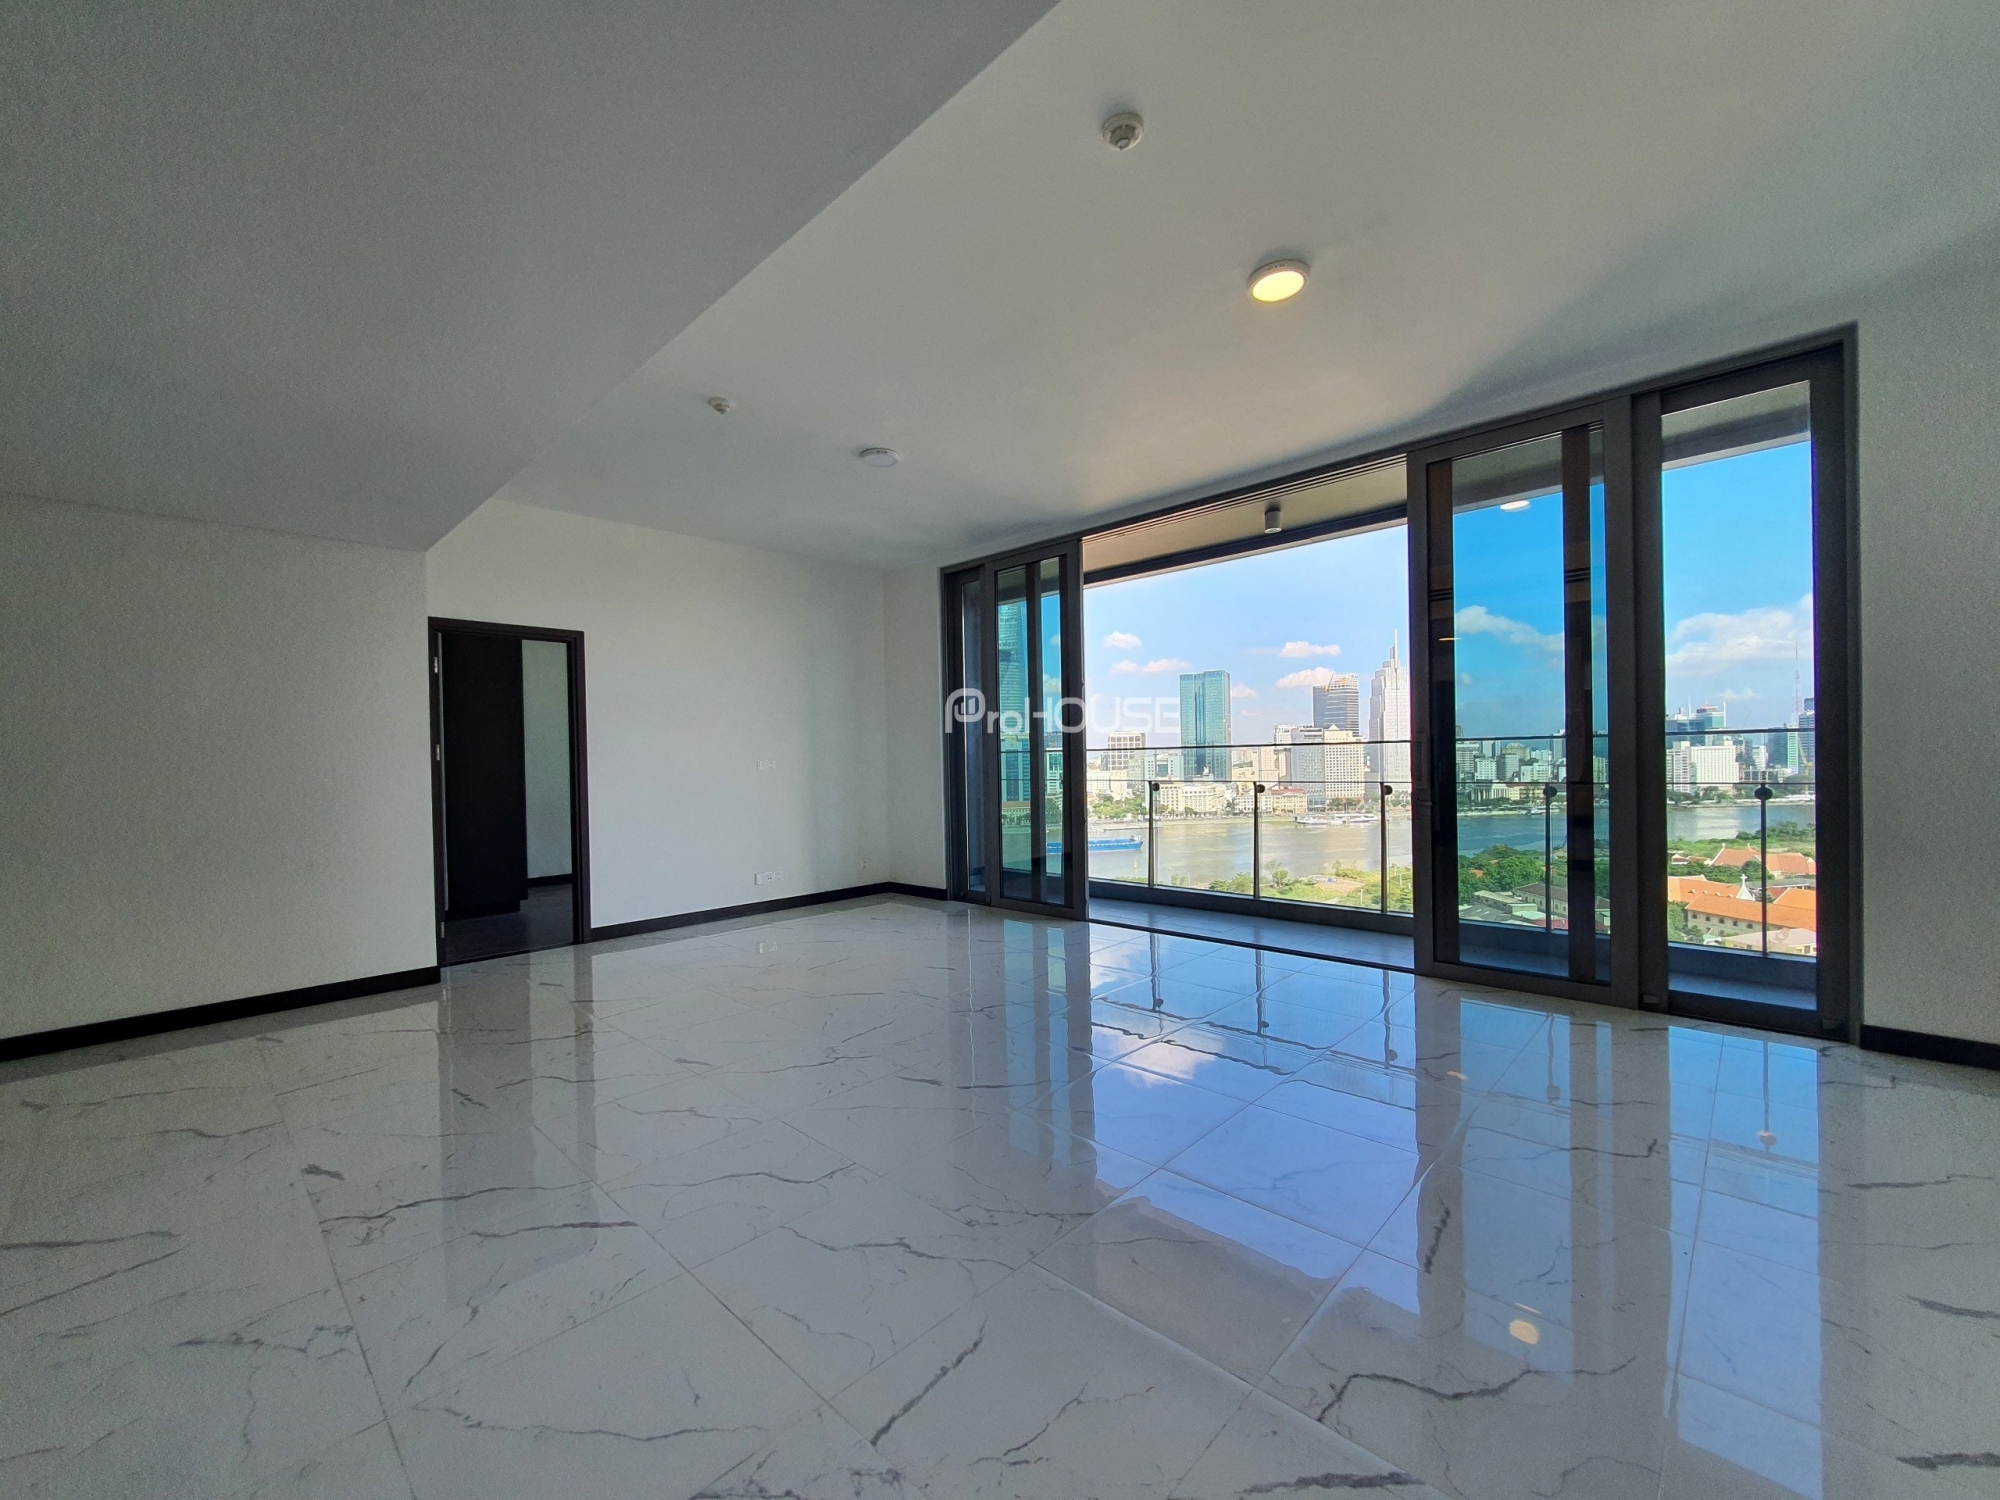 Spacious 3-bedroom apartment for rent in Empire City with open view